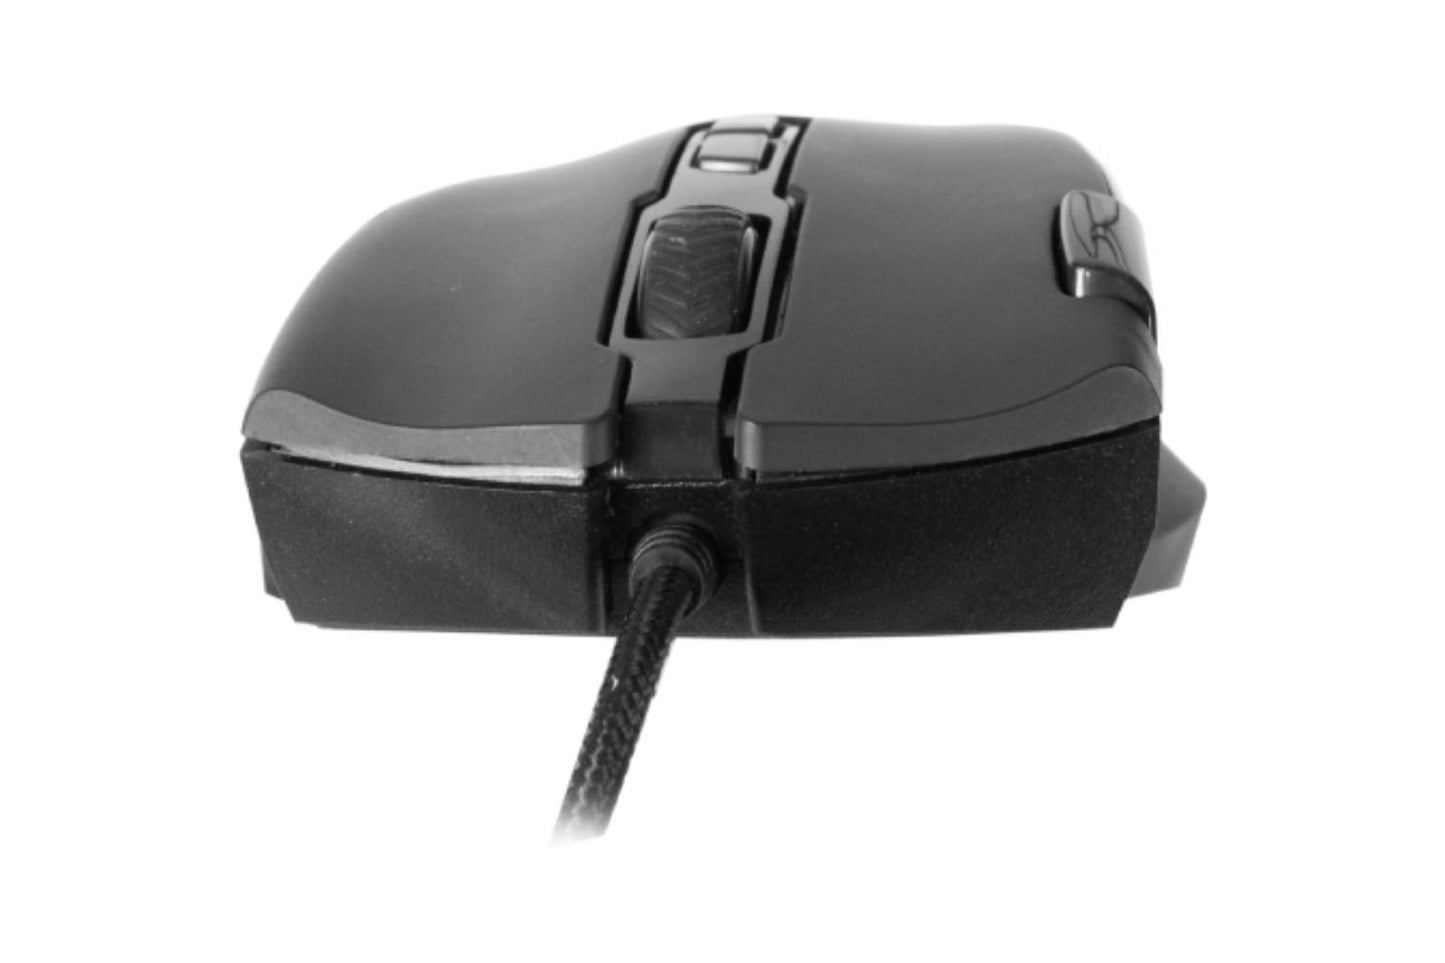 GALAX Gaming Mouse (Slider 01)-MOUSE-Galax-computerspace